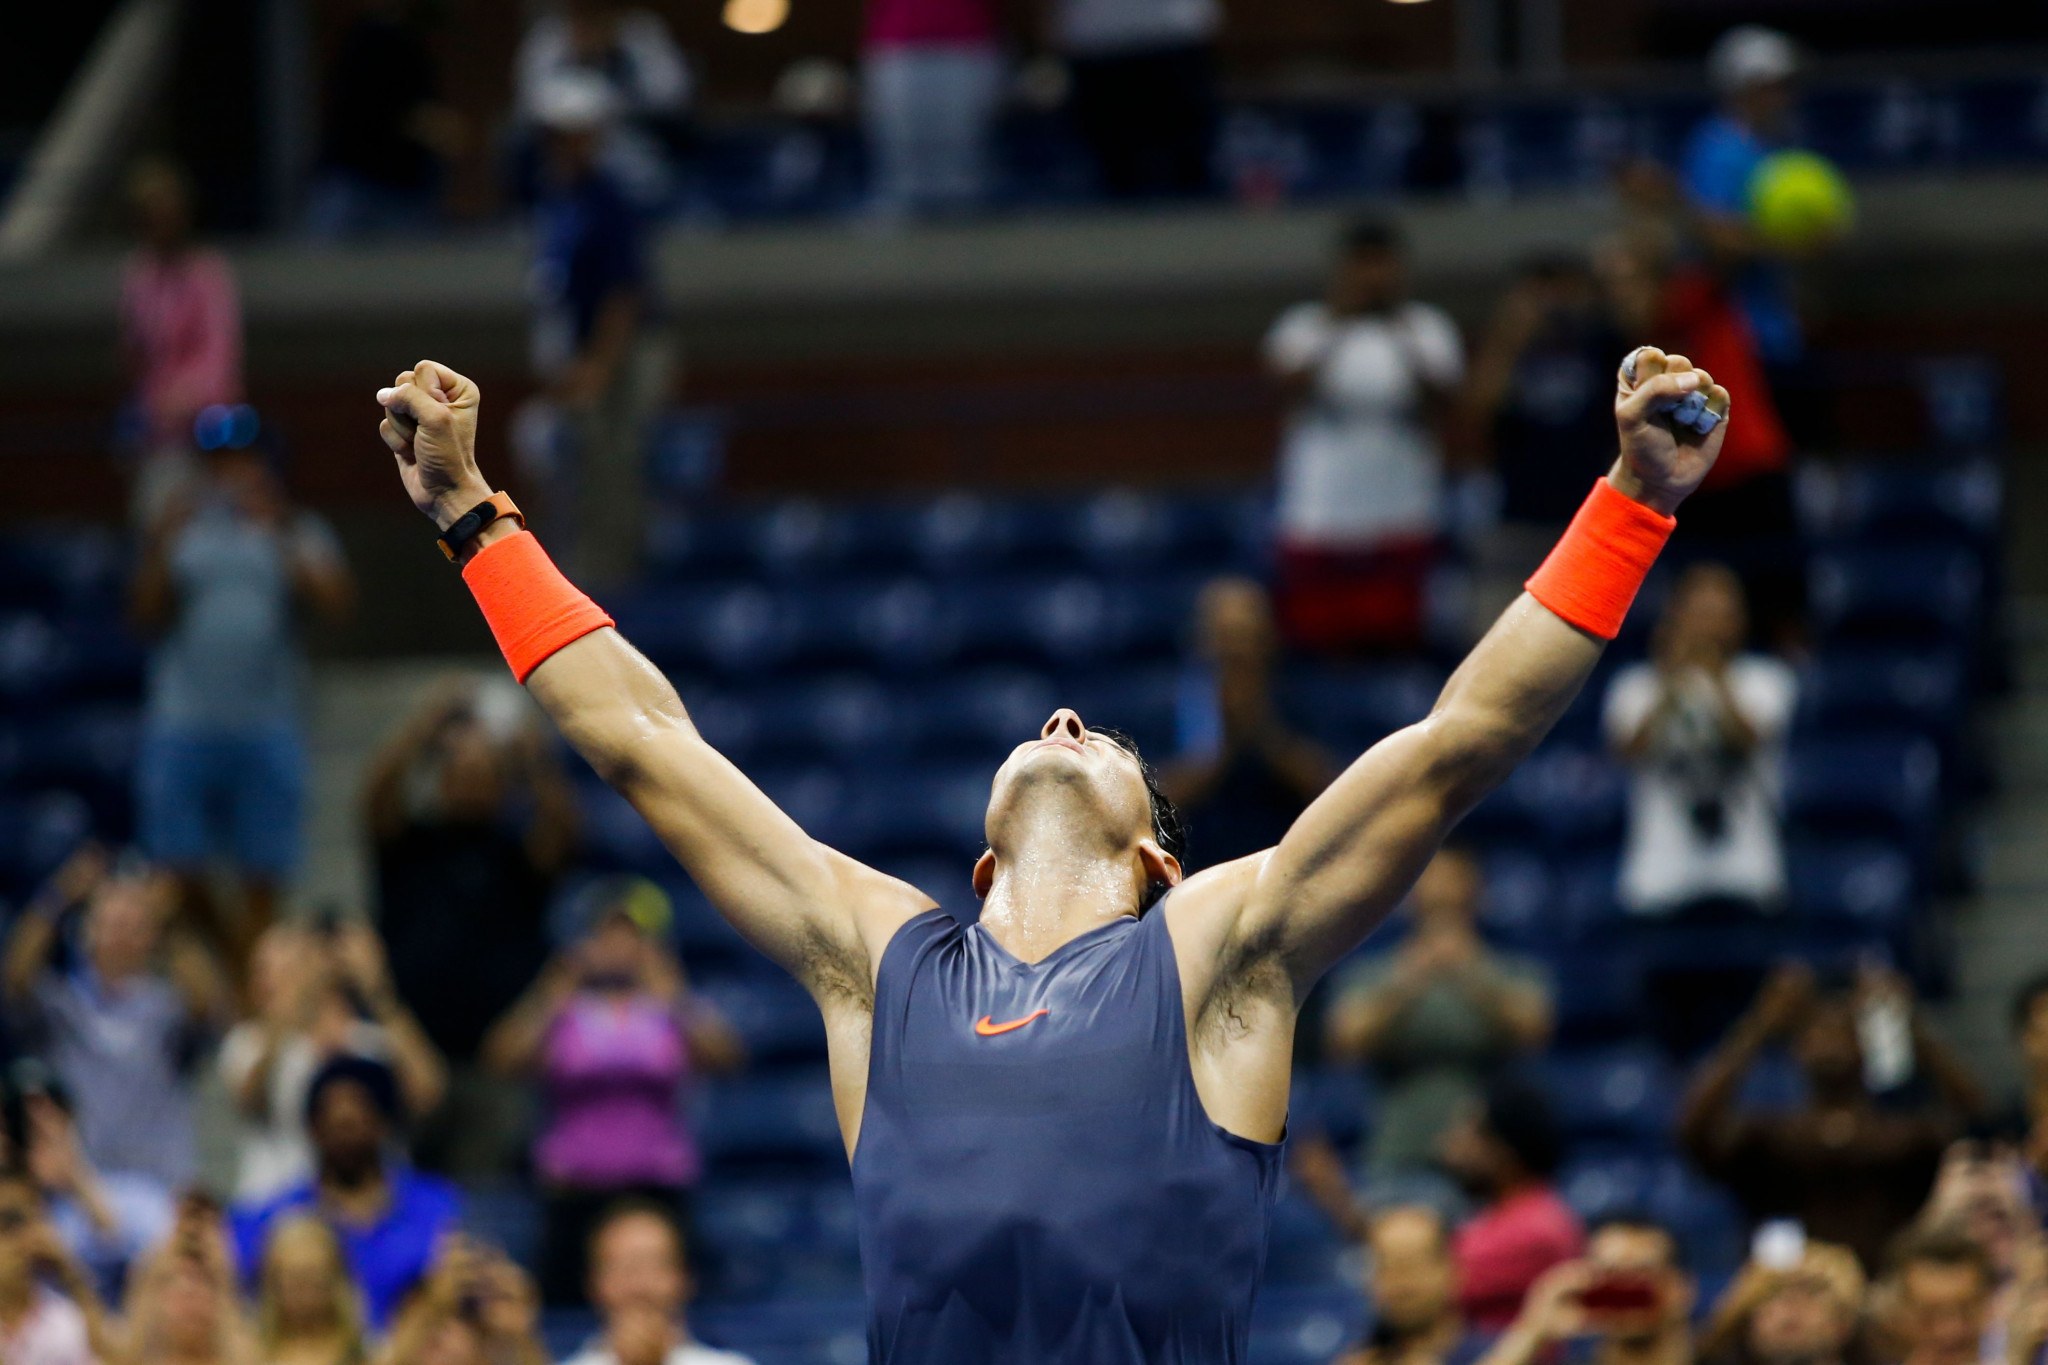 Defending champion Nadal battles through to semi-finals with thrilling win over Thiem at US Open